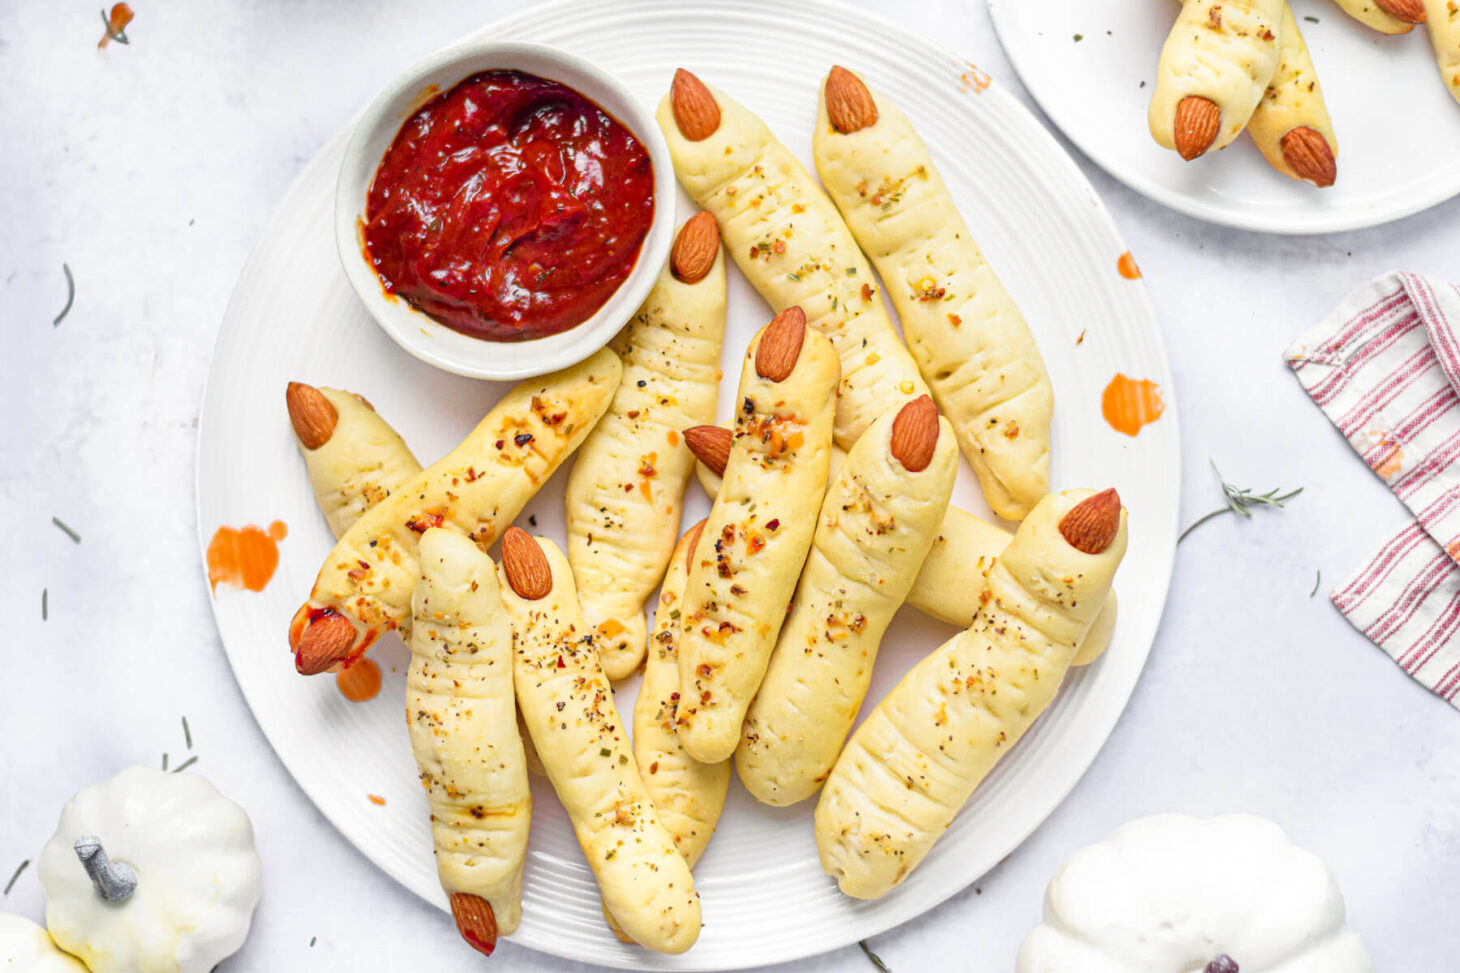 A white plate containing many creepy witch finger Italian breadsticks with a small bowl of marinara sauce for dipping nearby.